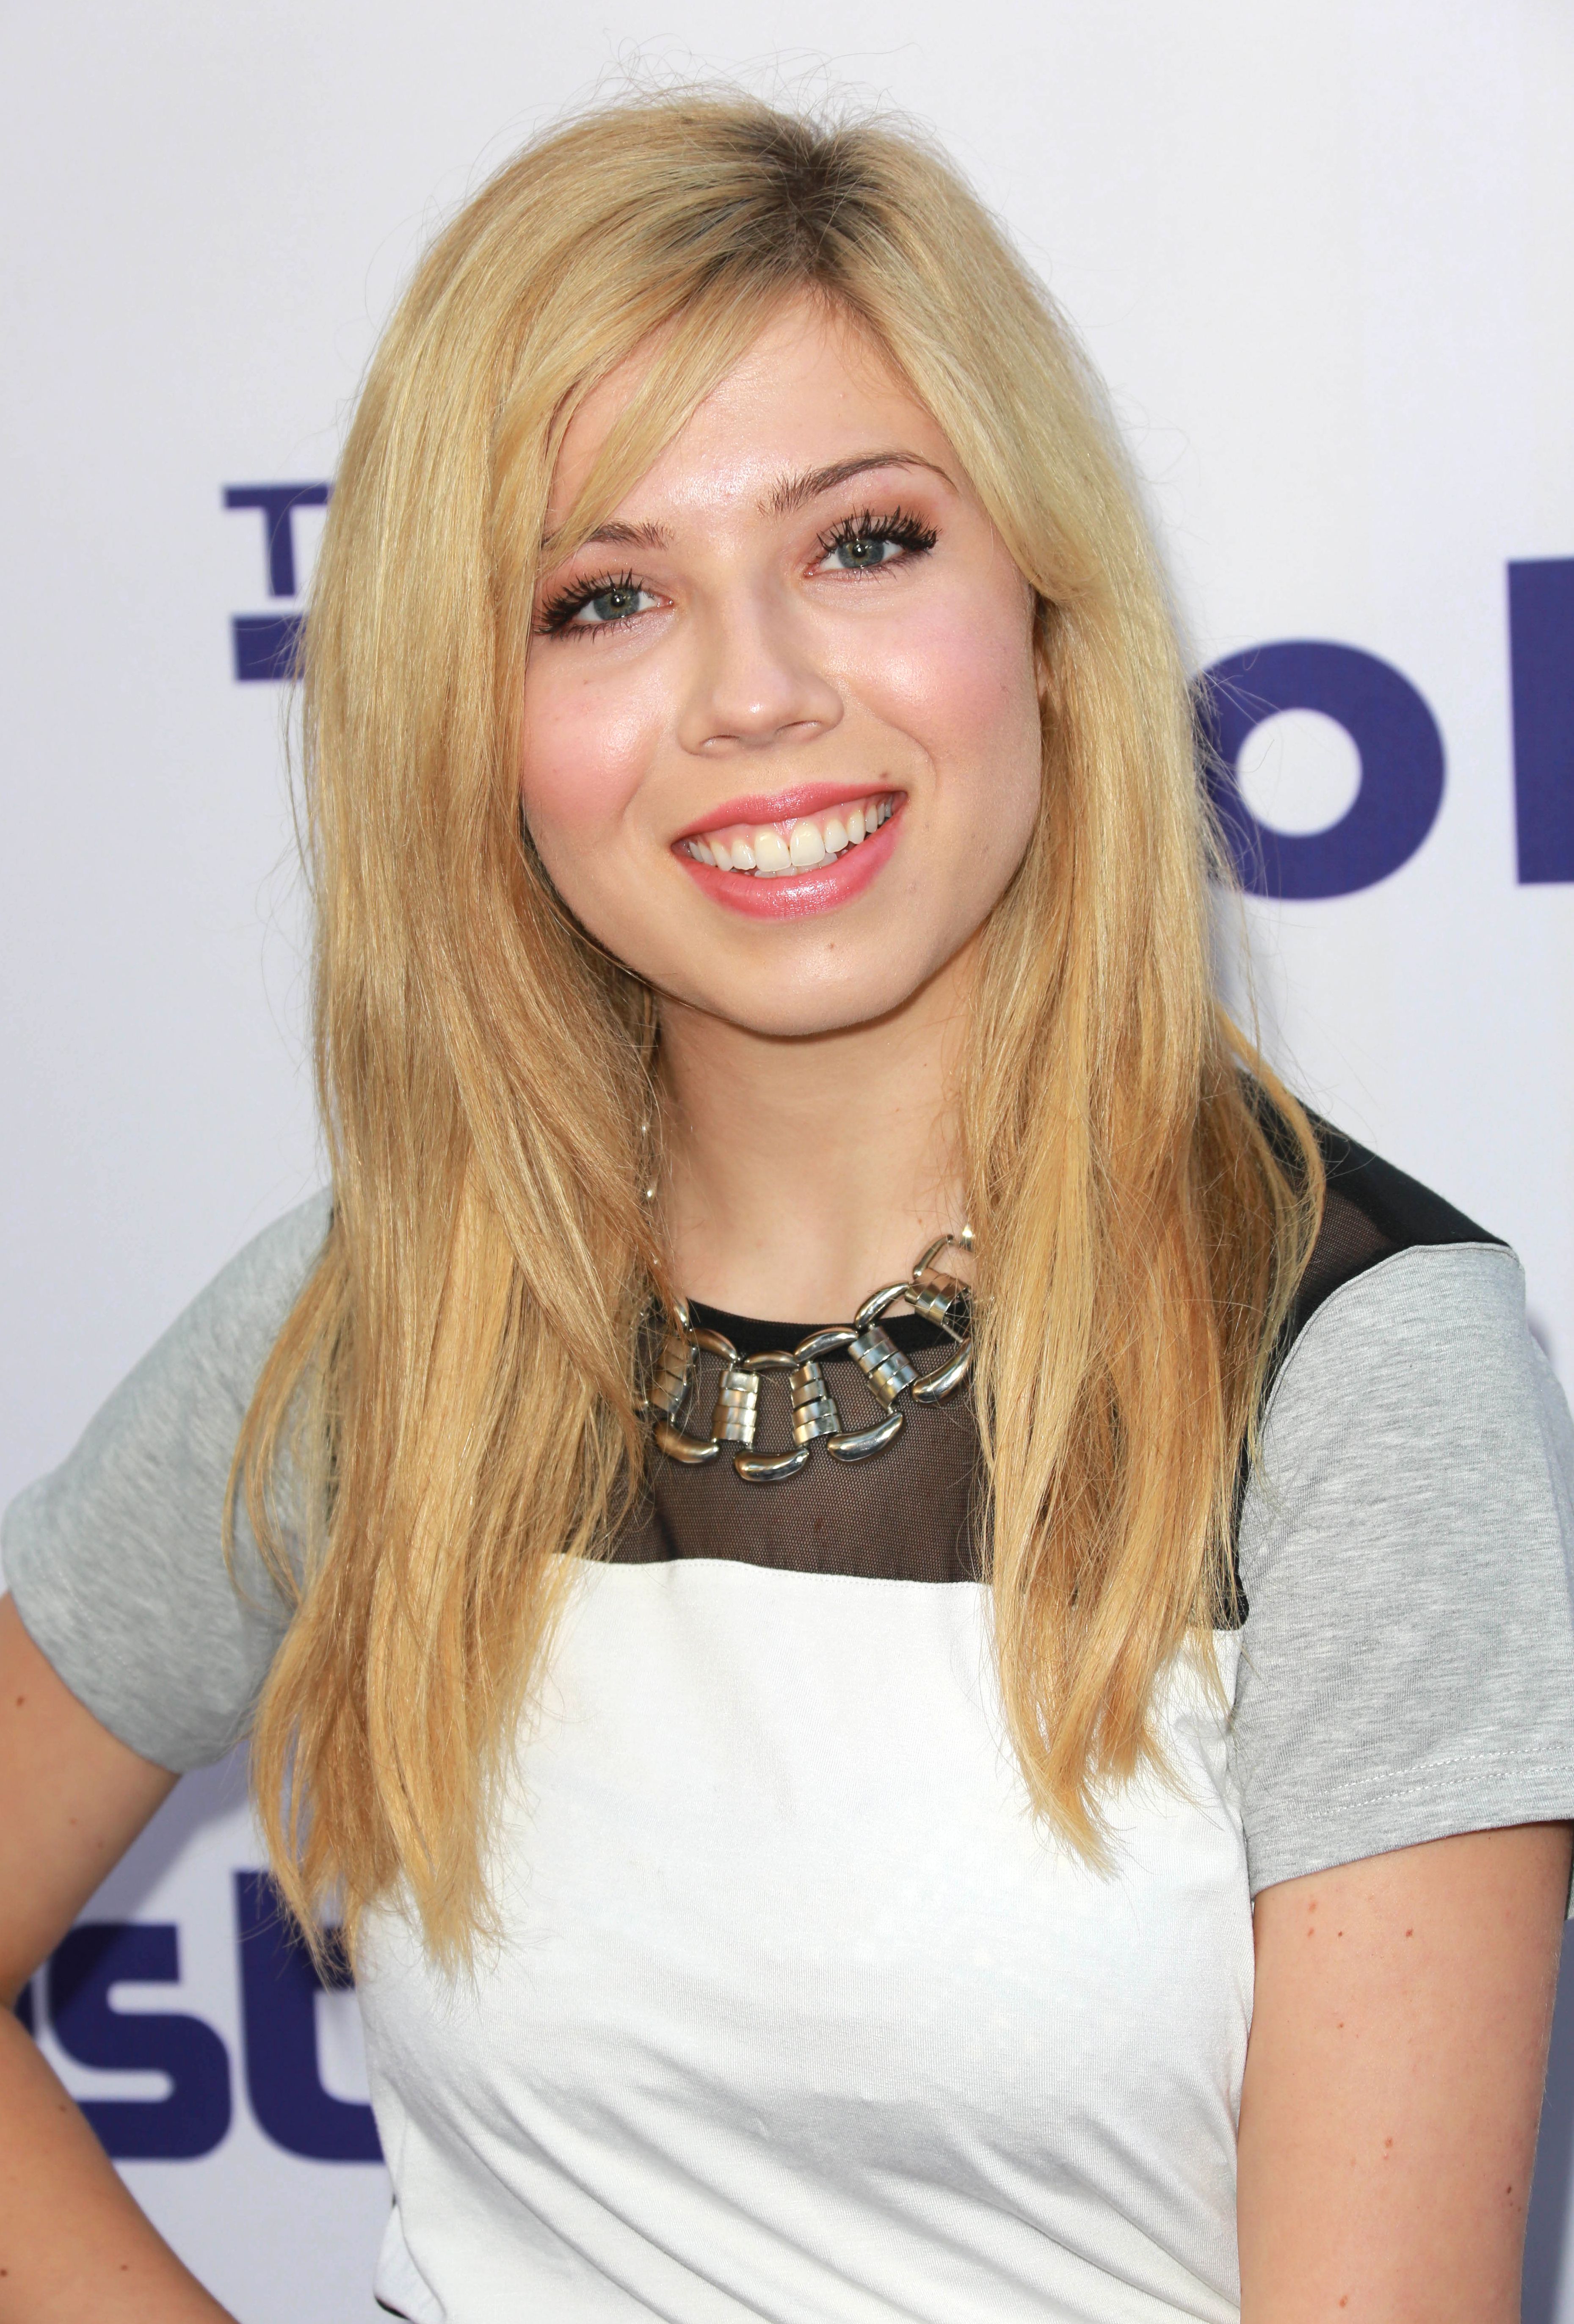 Jennette McCurdy Transformation From 'iCarly' to Now: Photos | J-14